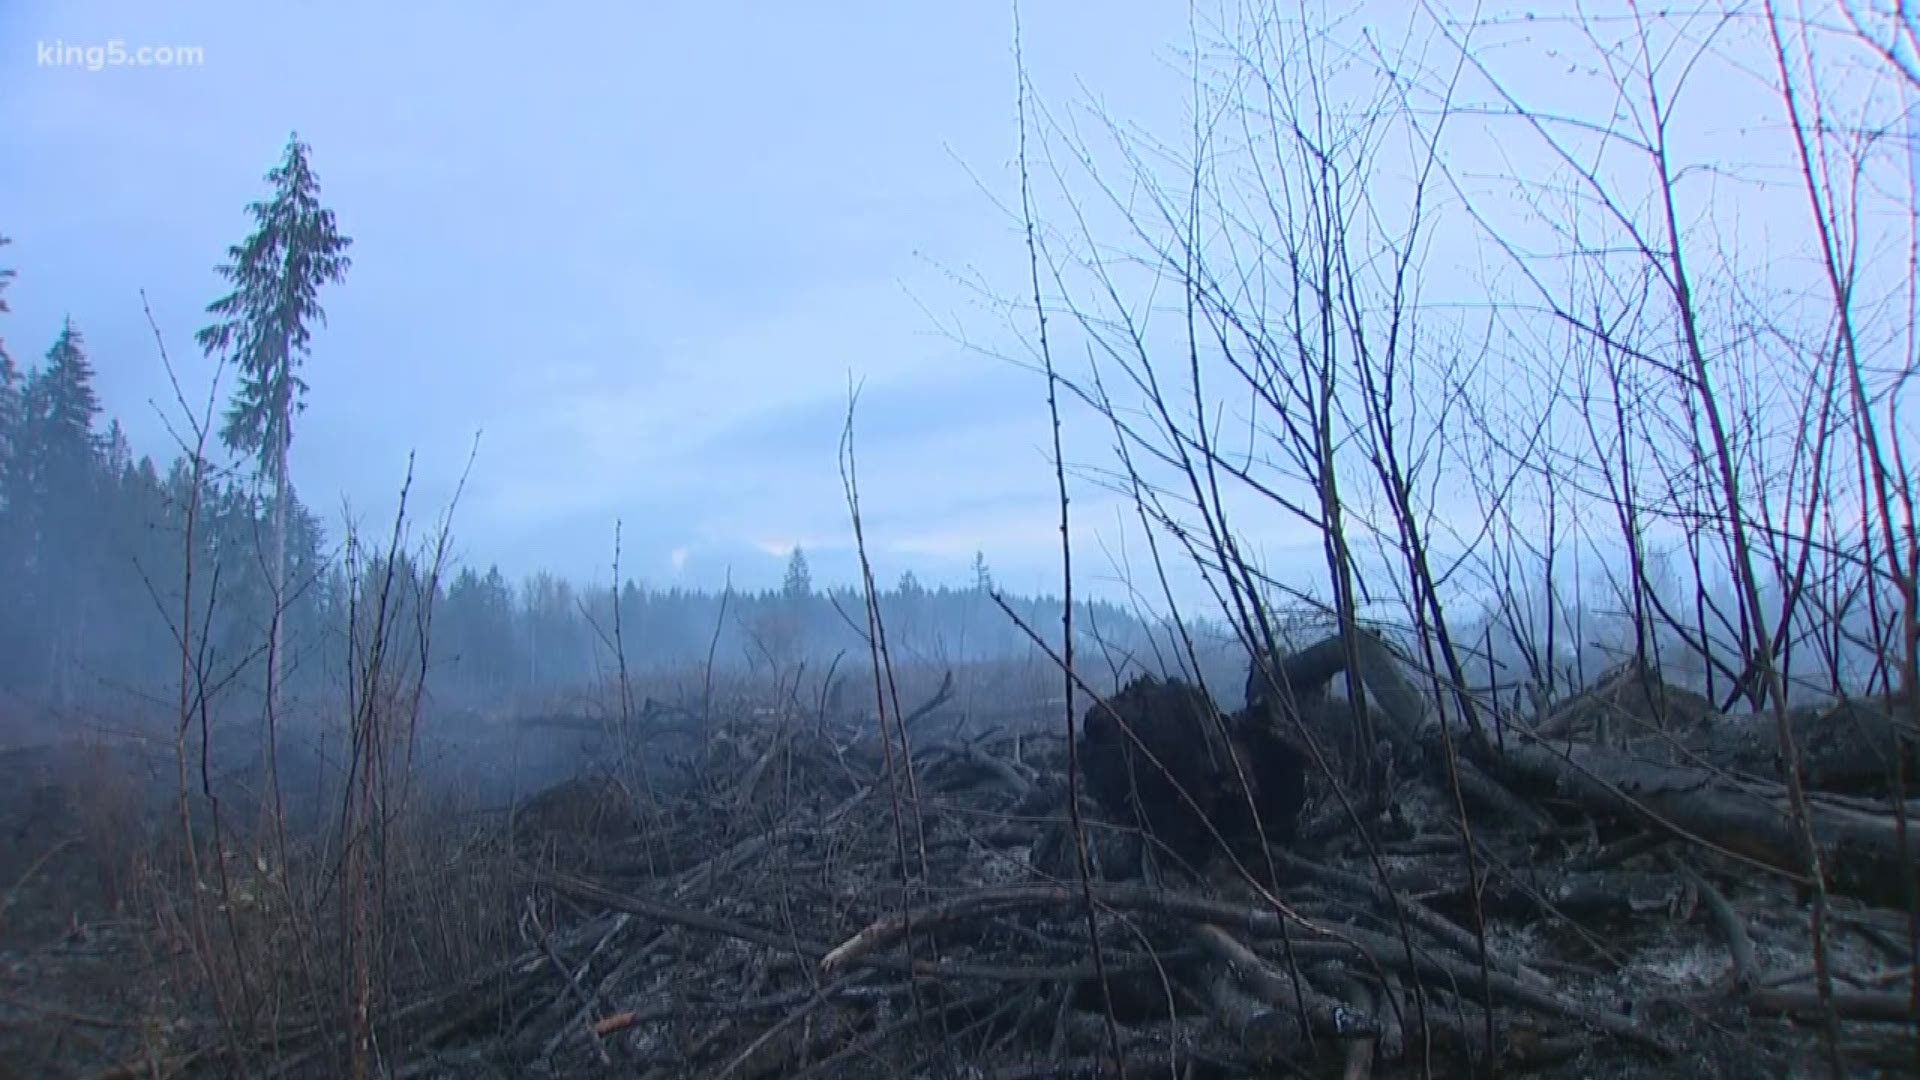 Dozens of fires across Washington this early in the season have firefighters and state officials concerned. On Thursday, NOAA issued an advisory saying we could be in store for a hotter and drier Spring than normal.